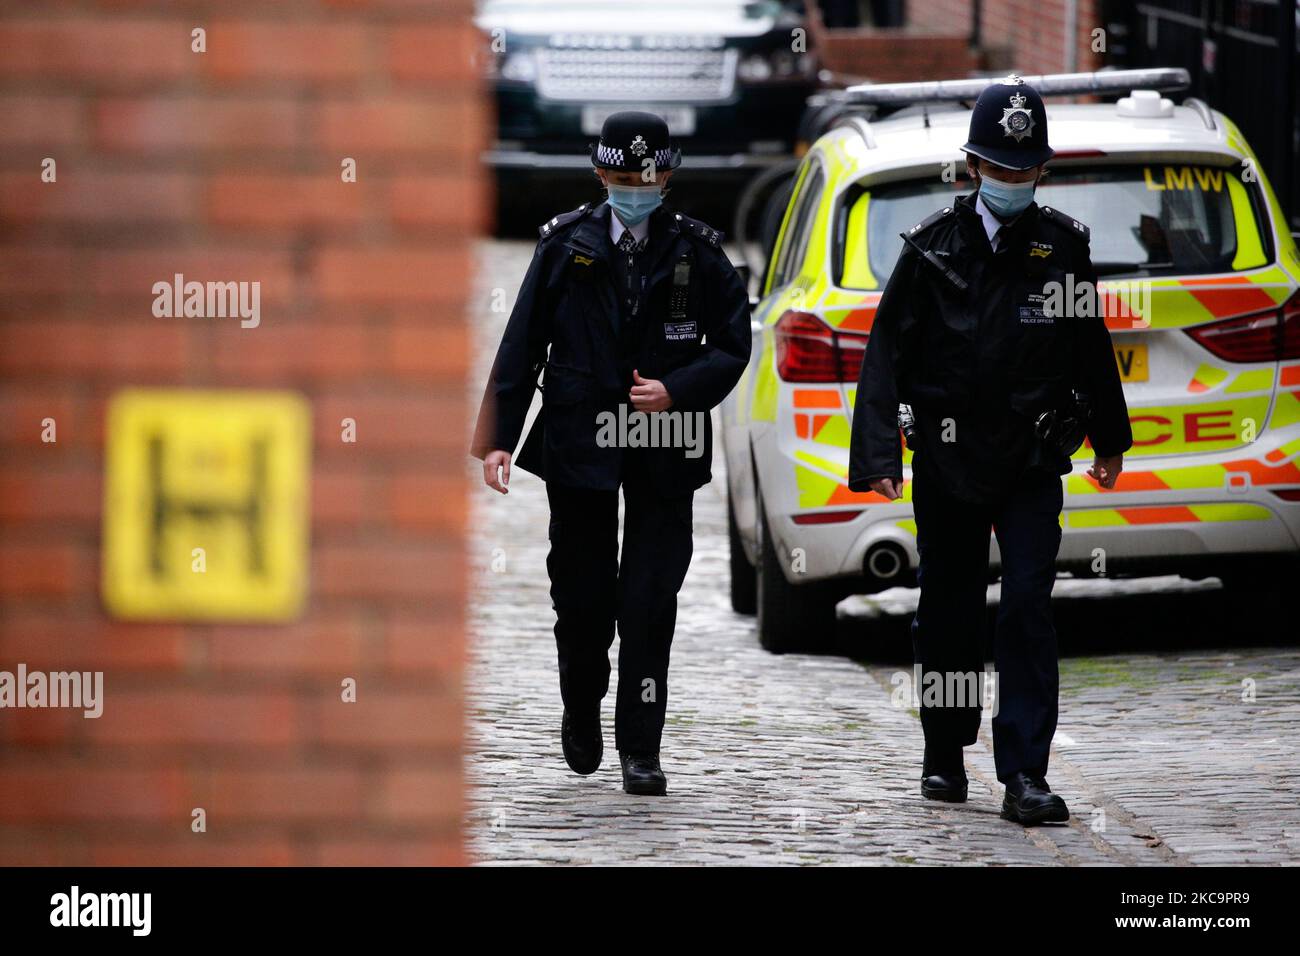 Police officers guard the King Edward VII Hospital, where Britain's 99-year-old Prince Philip, the Duke of Edinburgh, continues to receive medical care in London, England, on February 21, 2021. Prince Philip, husband of Queen Elizabeth II, was admitted to the hospital on Tuesday after reporting feeling unwell. (Photo by David Cliff/NurPhoto) Stock Photo